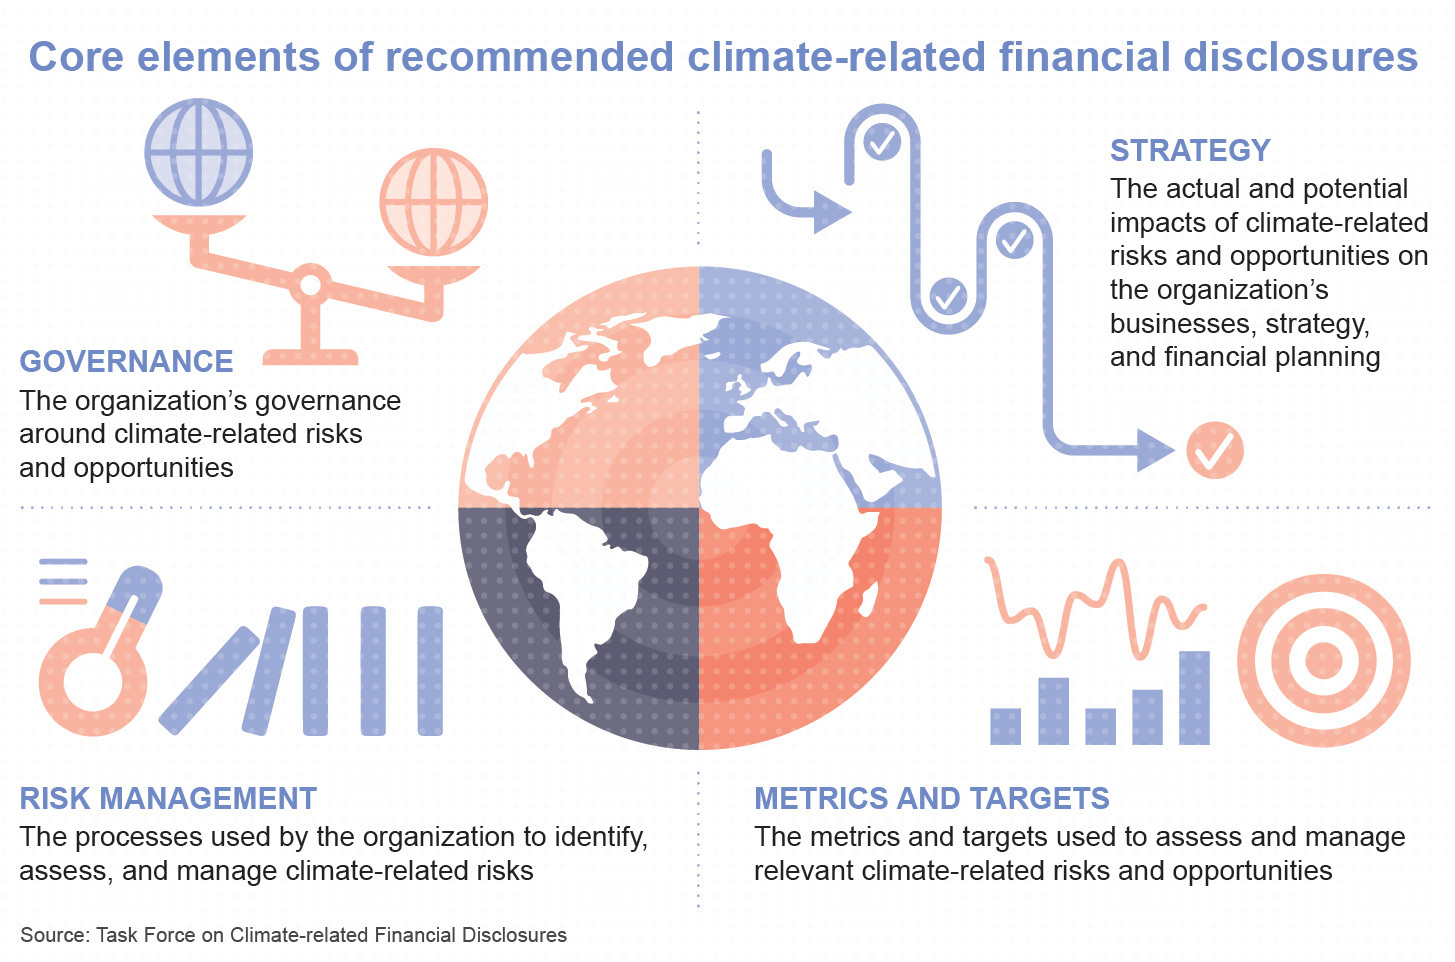 Core elements of recommended Climate-related Financial Disclosures